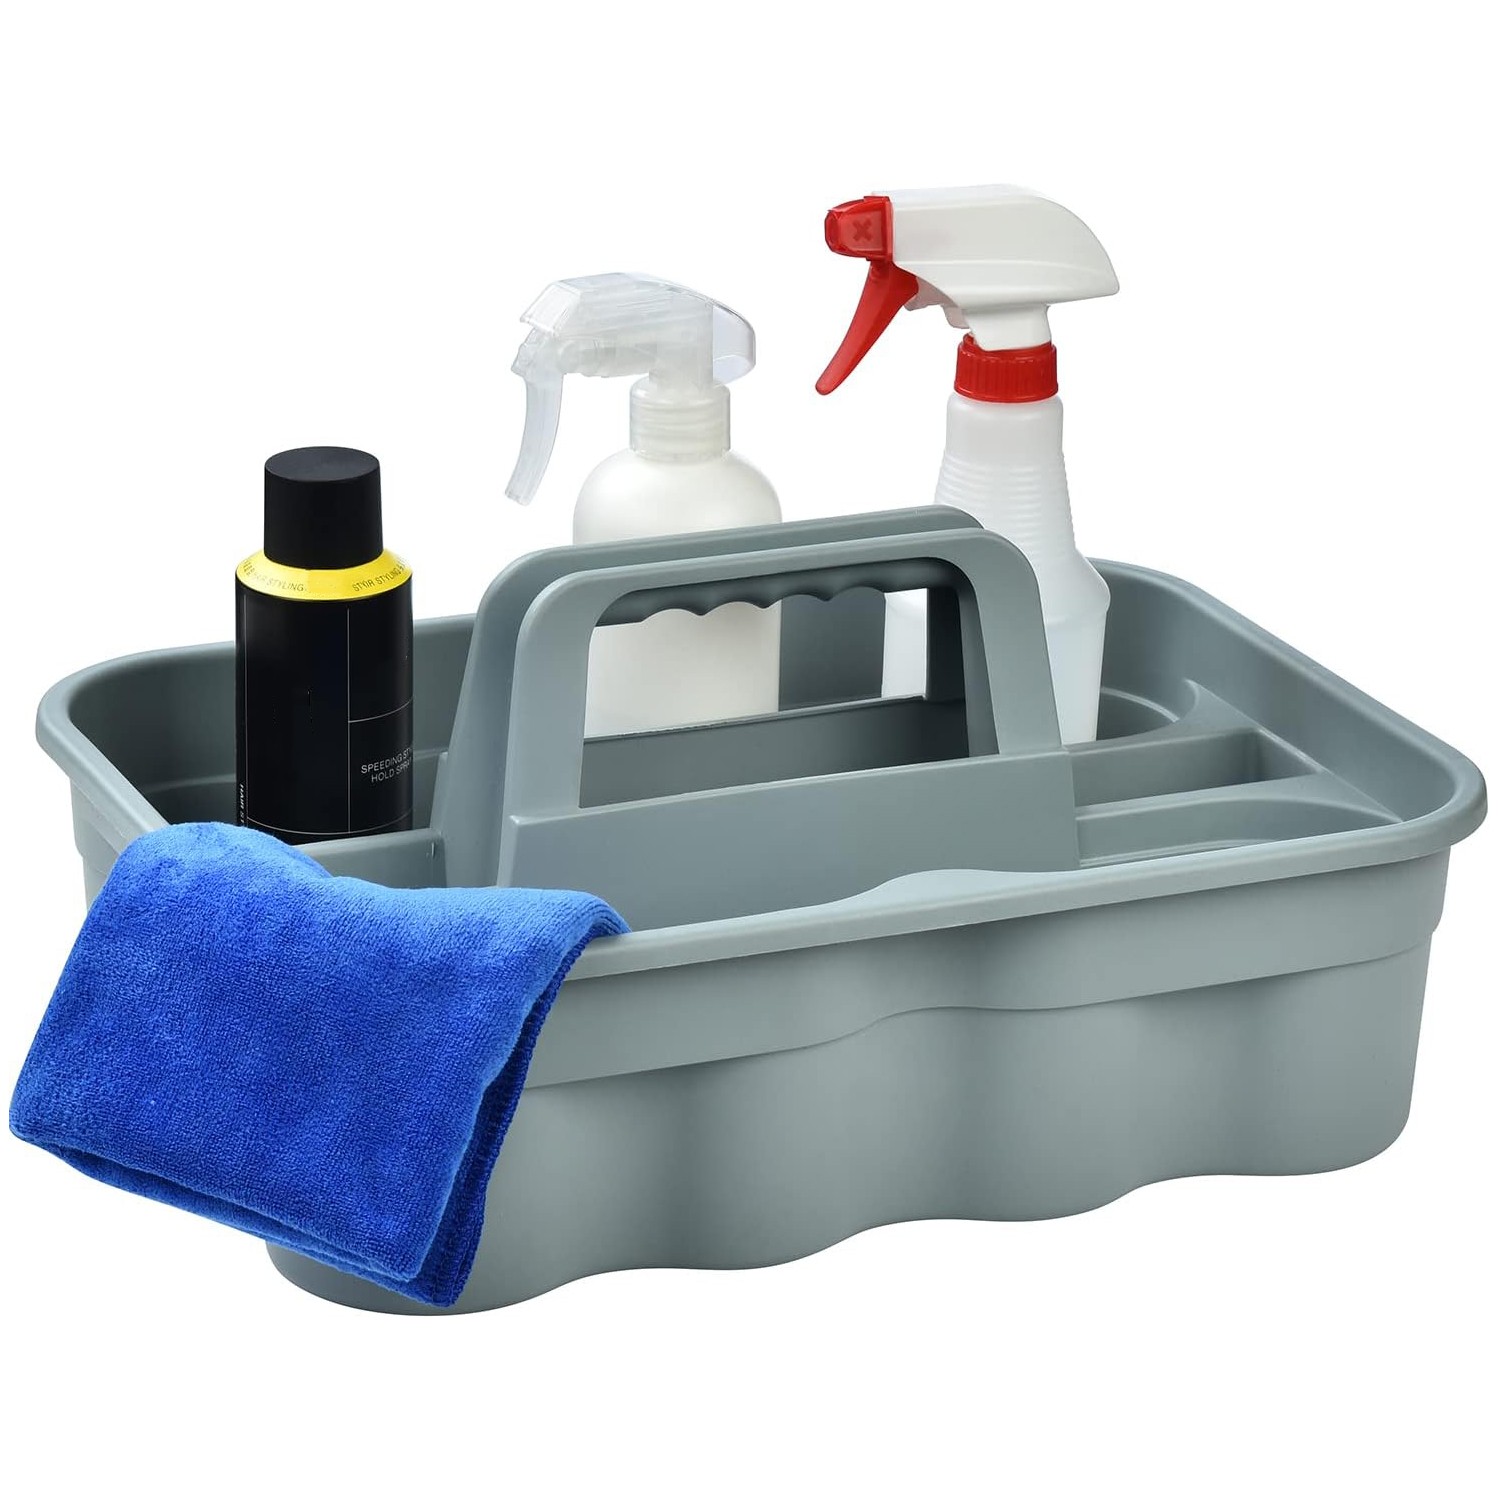  Cleaning Caddy, Cleaning Supplies Organizer with